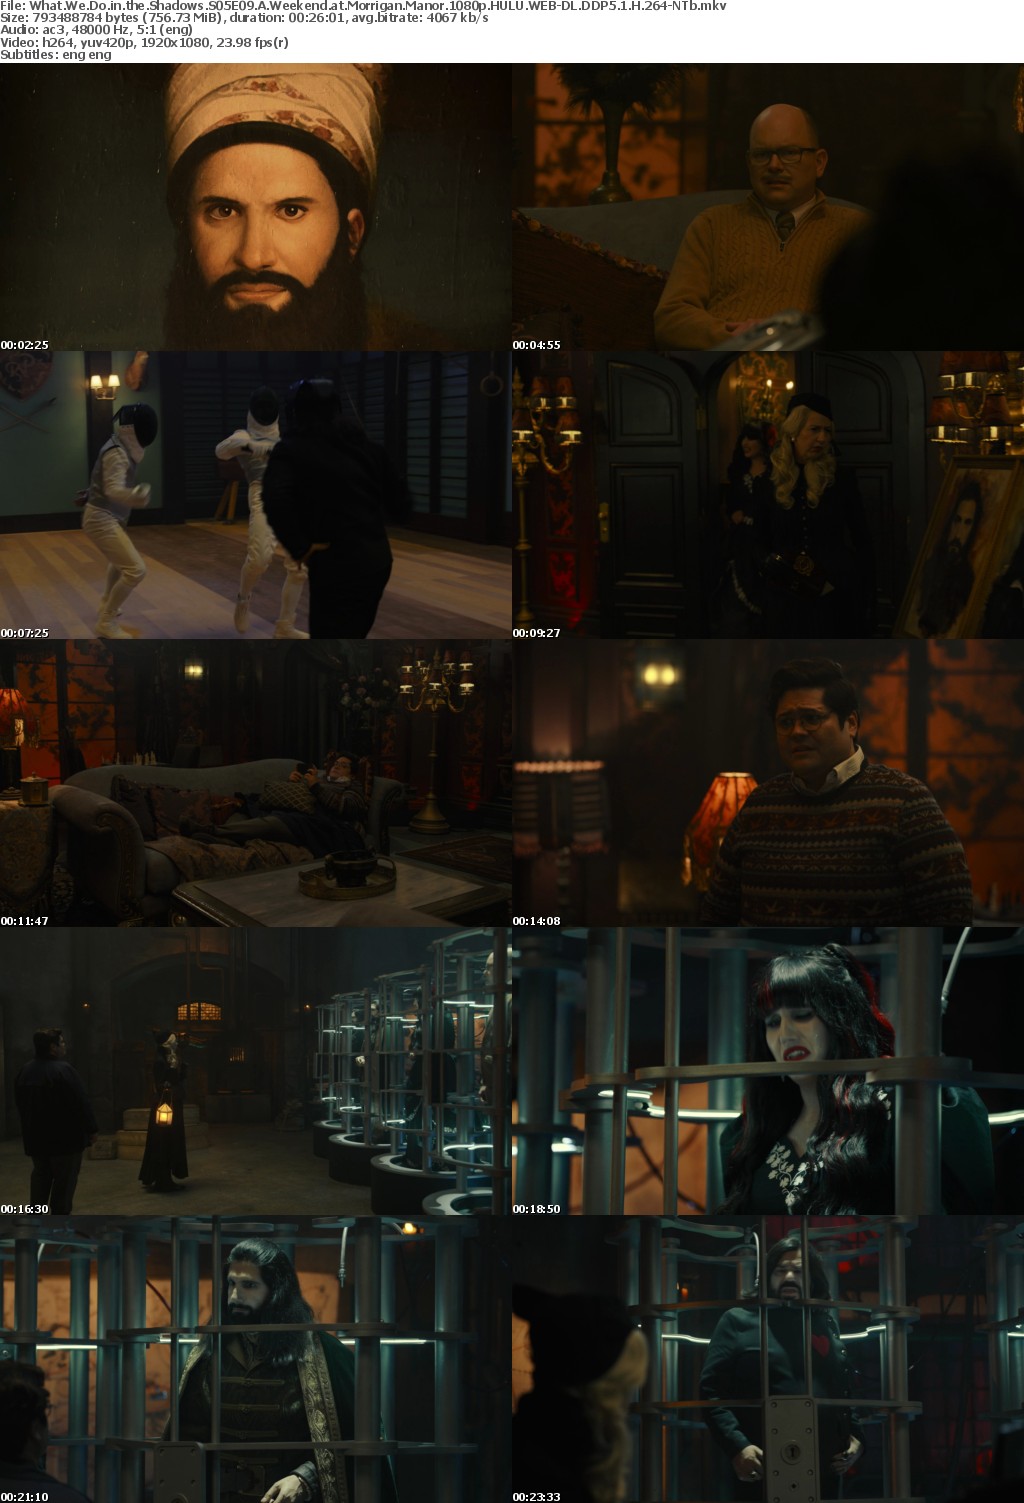 What We Do in the Shadows S05E09 A Weekend at Morrigan Manor 1080p HULU WEB-DL DDP5 1 H 264-NTb